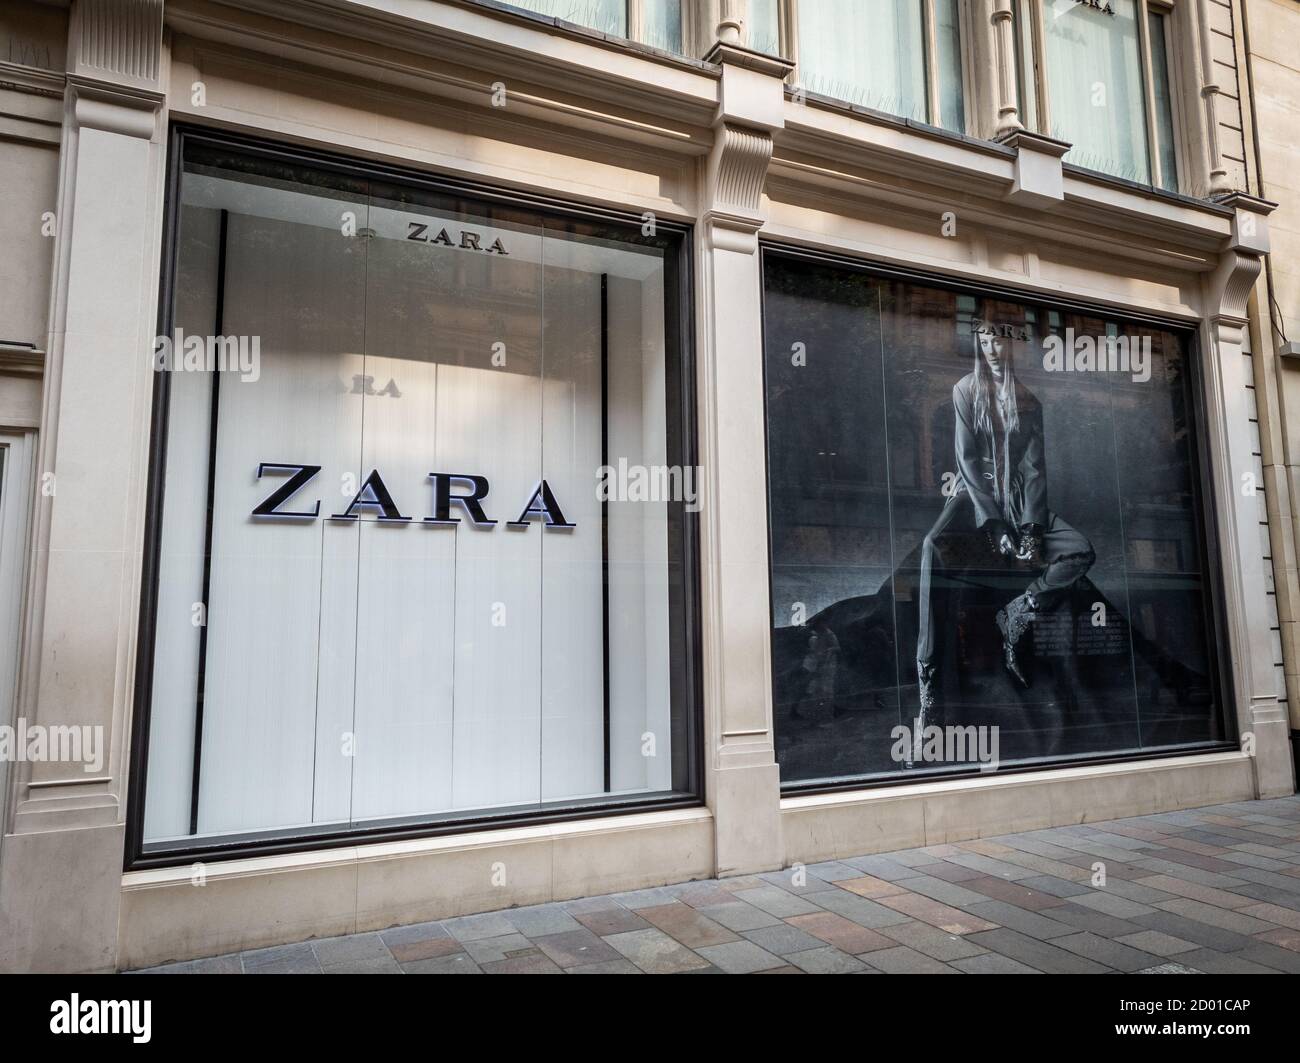 Page 2 - Zara Clothing High Resolution Stock Photography and Images - Alamy